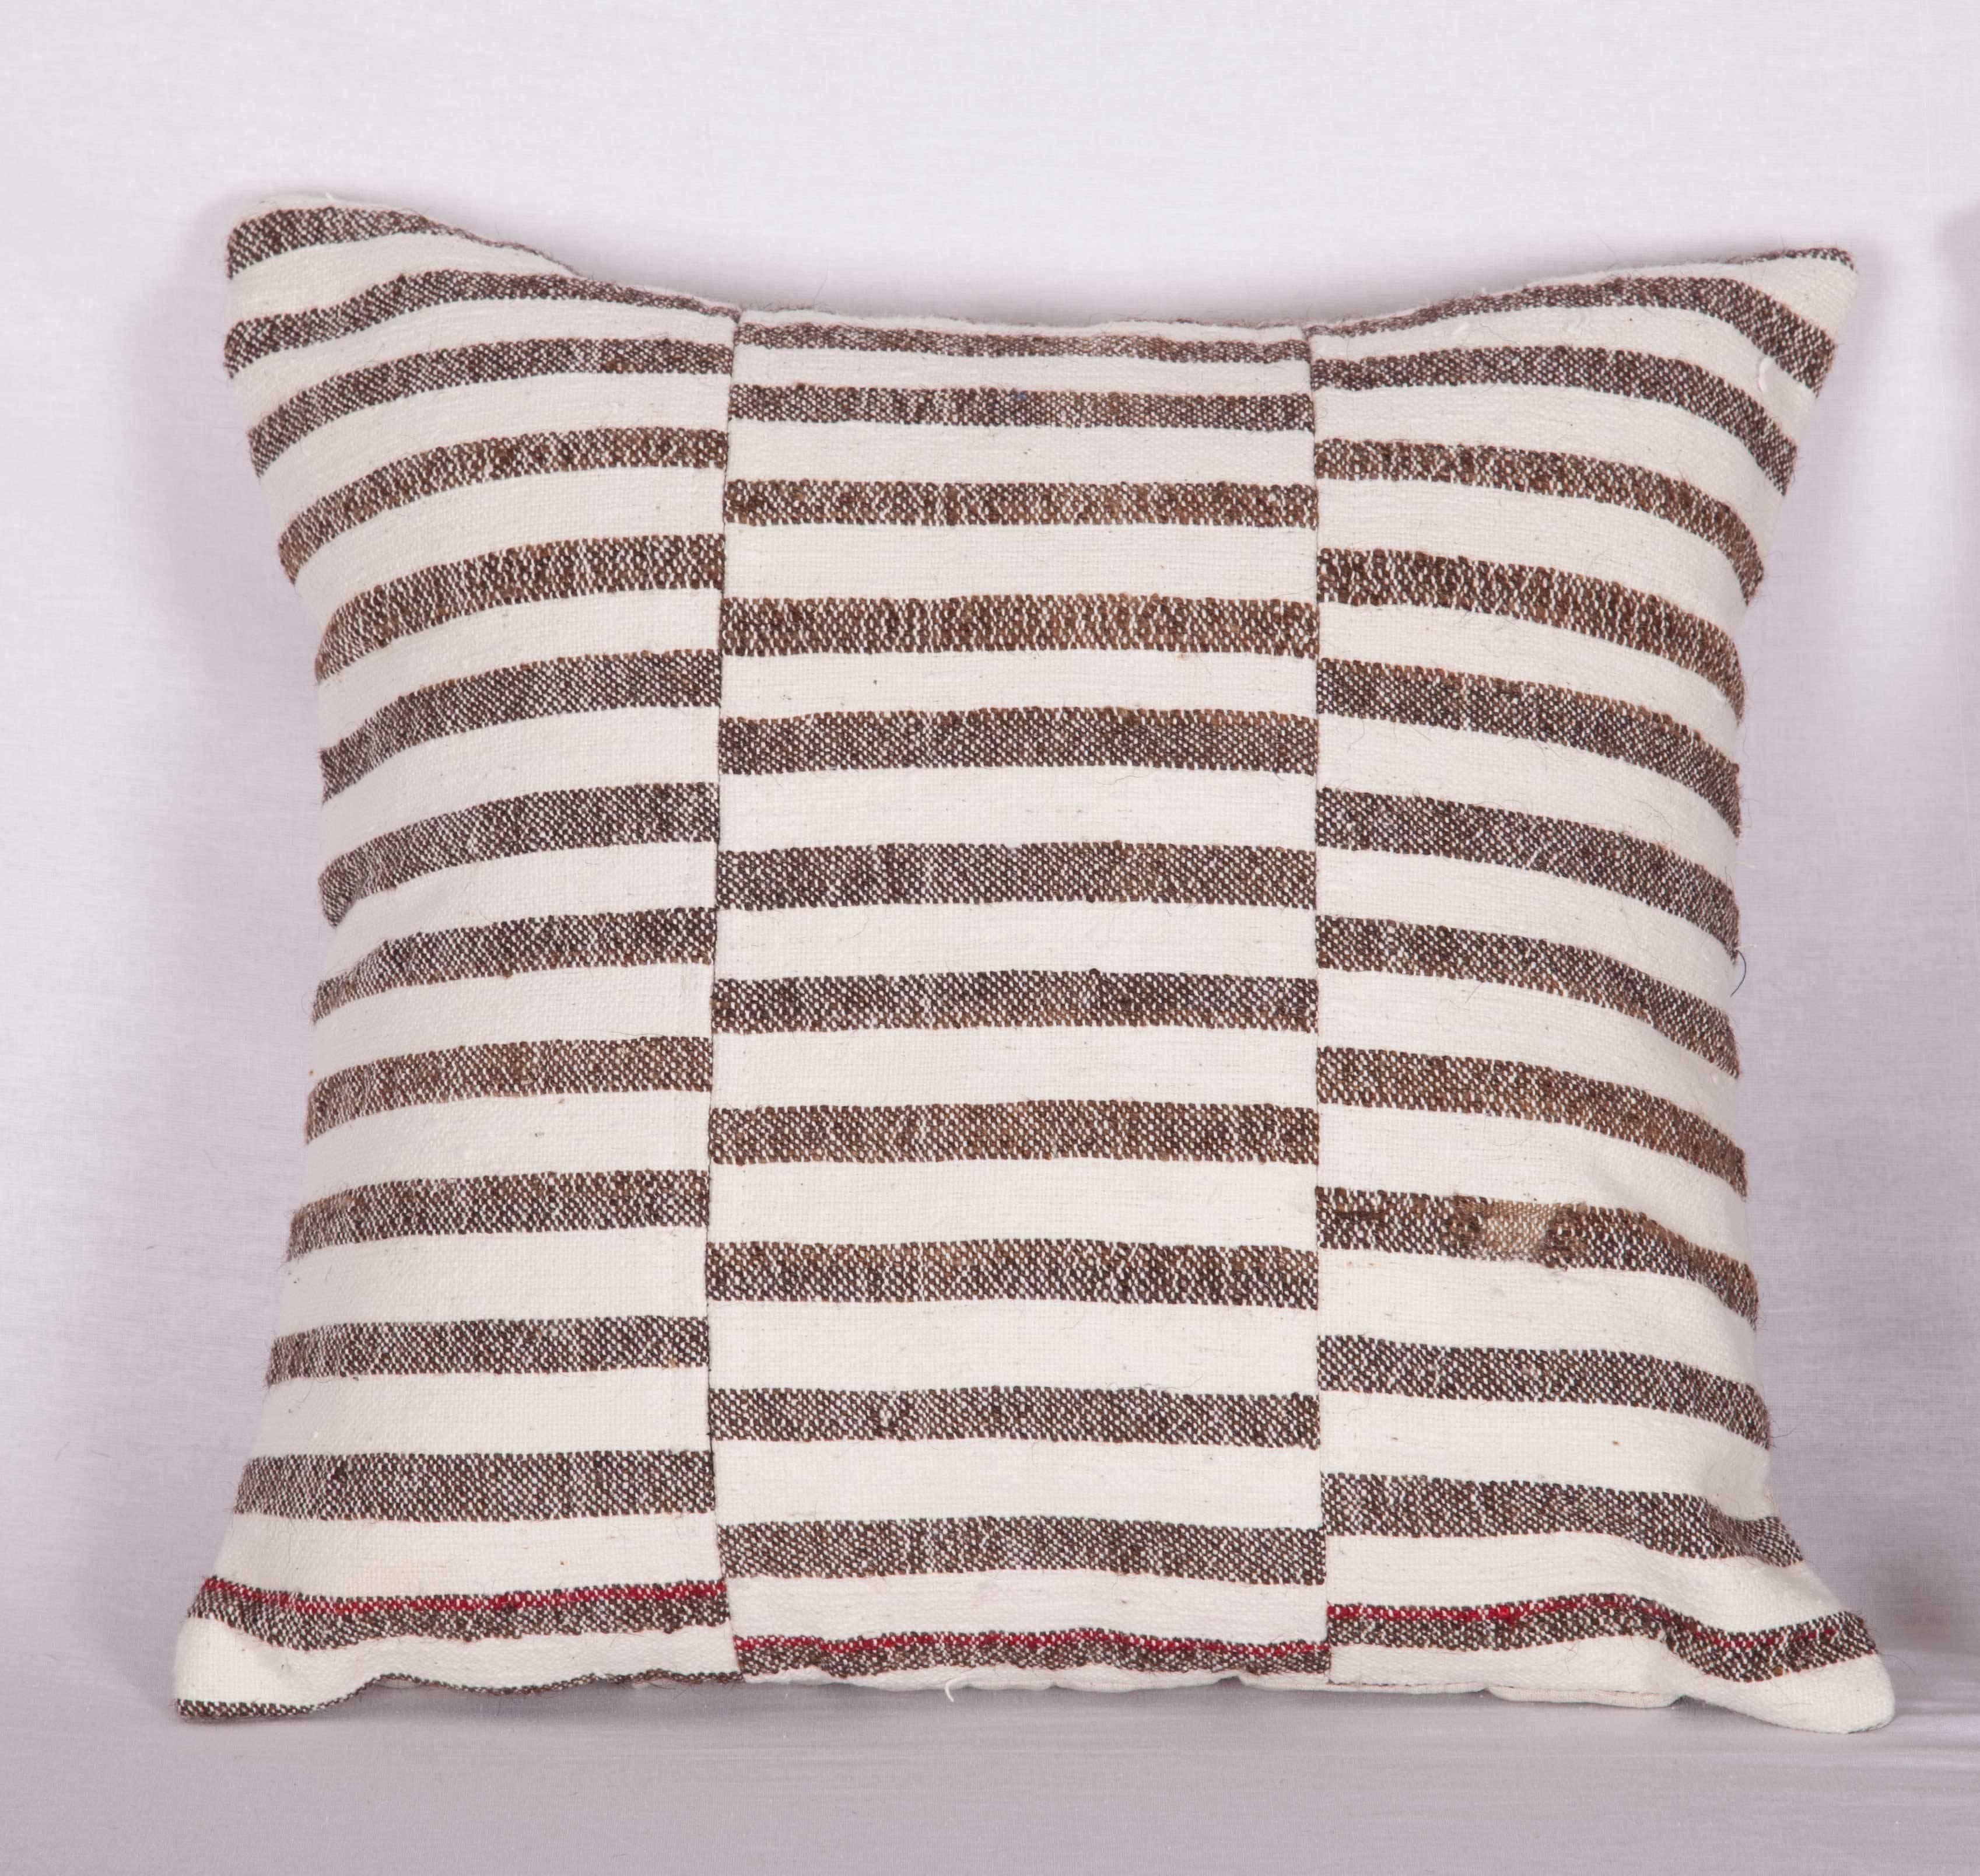 Pillow cases are made from a vintage Anatolian Kilim.
They do not come with an insert but they come with a bag made to the size and out of cotton to accommodate the filling for each.
The backing is made of linen.
Please note filling is not